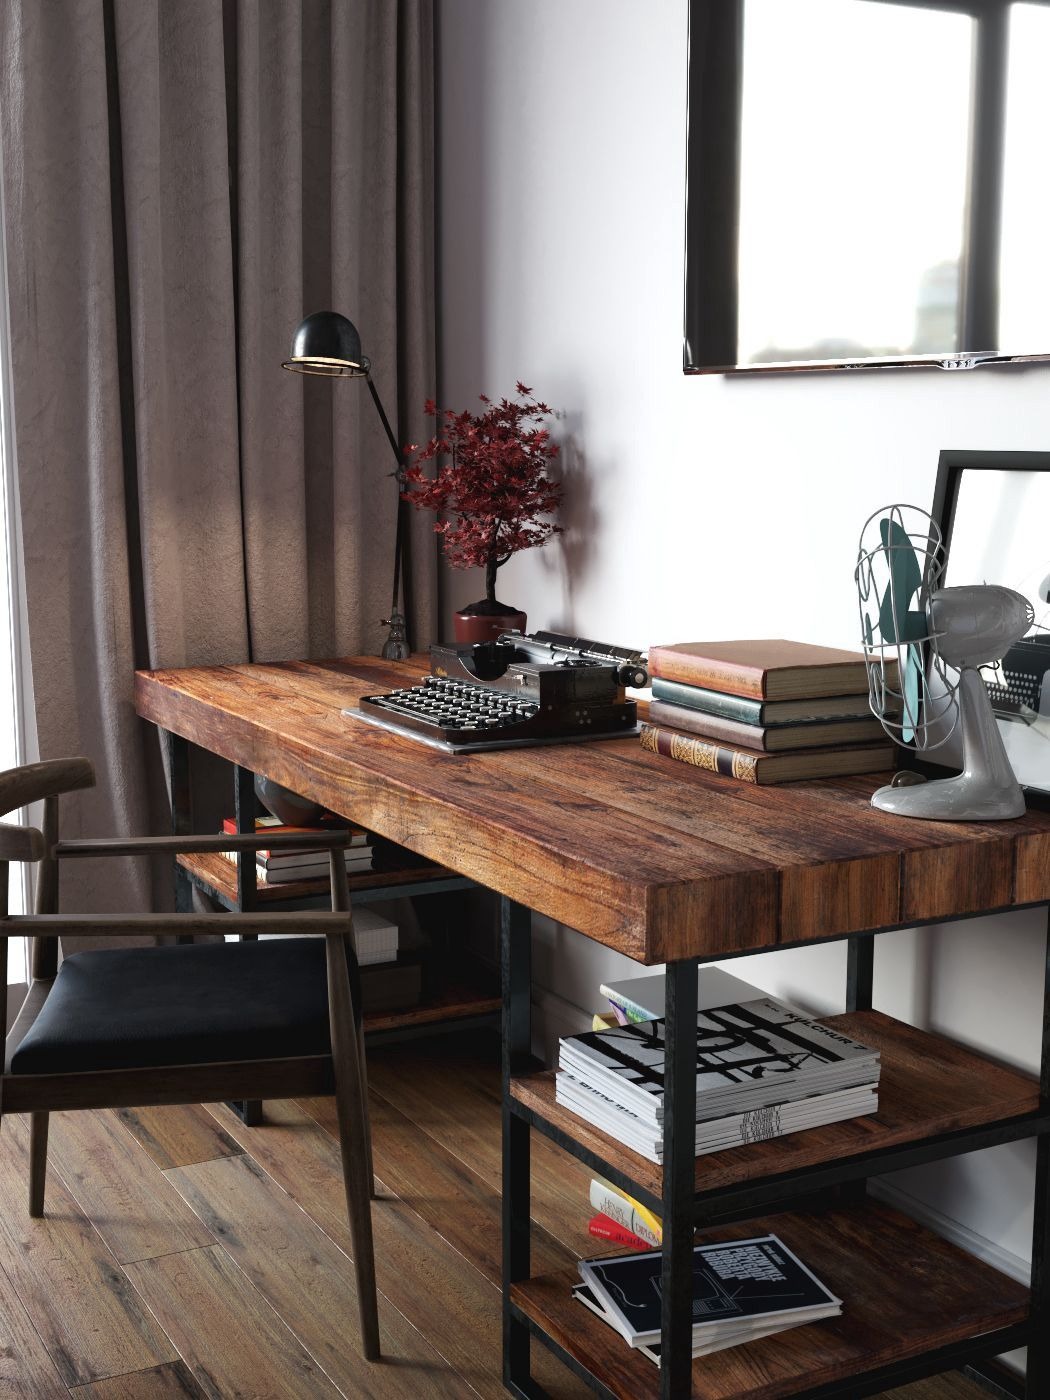 Rustic Desk for A Classic and Natural Impression